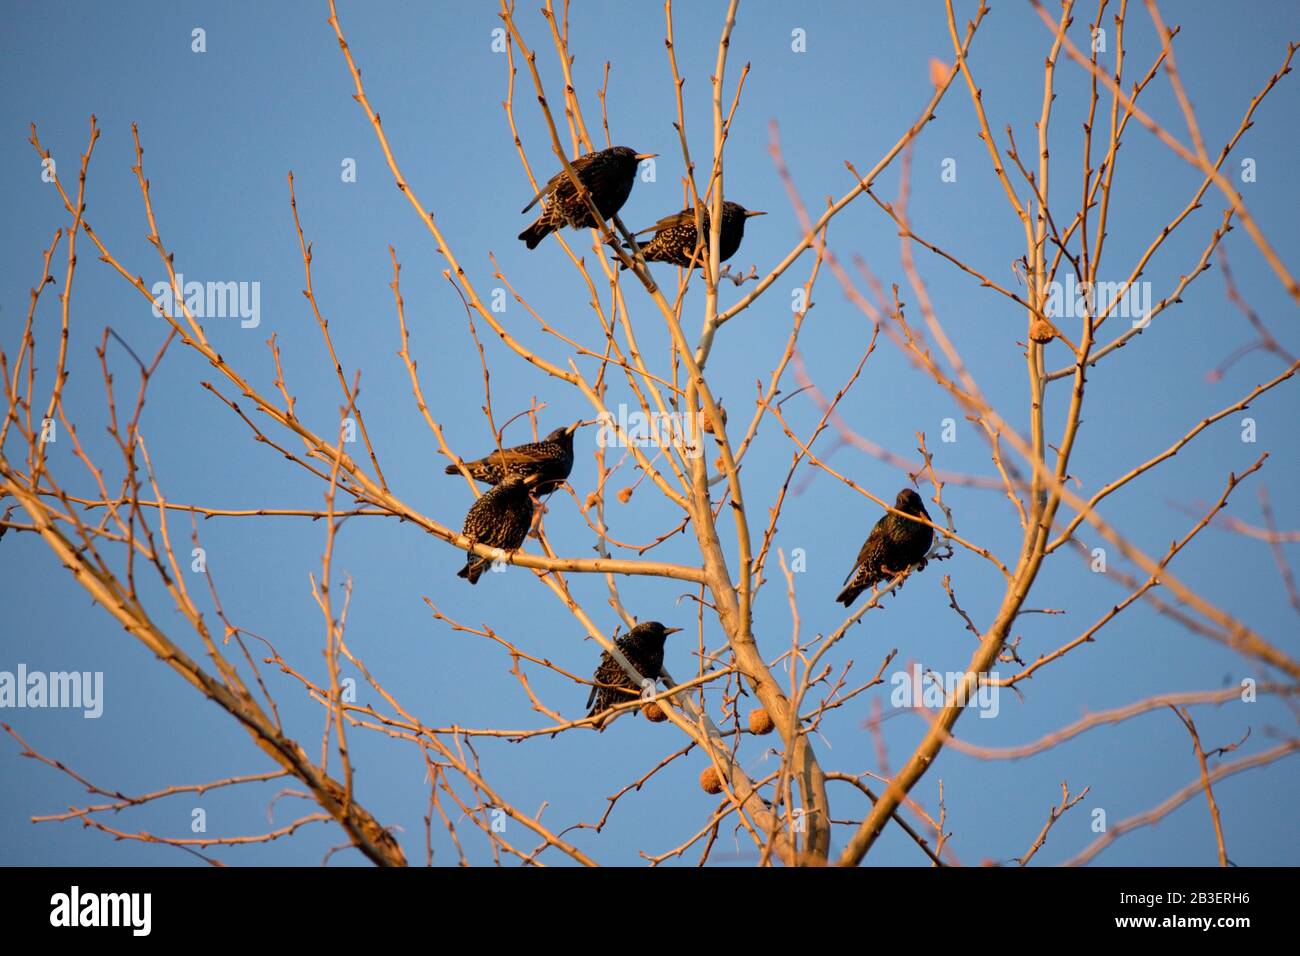 Flock of Starlings Perched in a Tree During Migration in the Spring Stock Photo